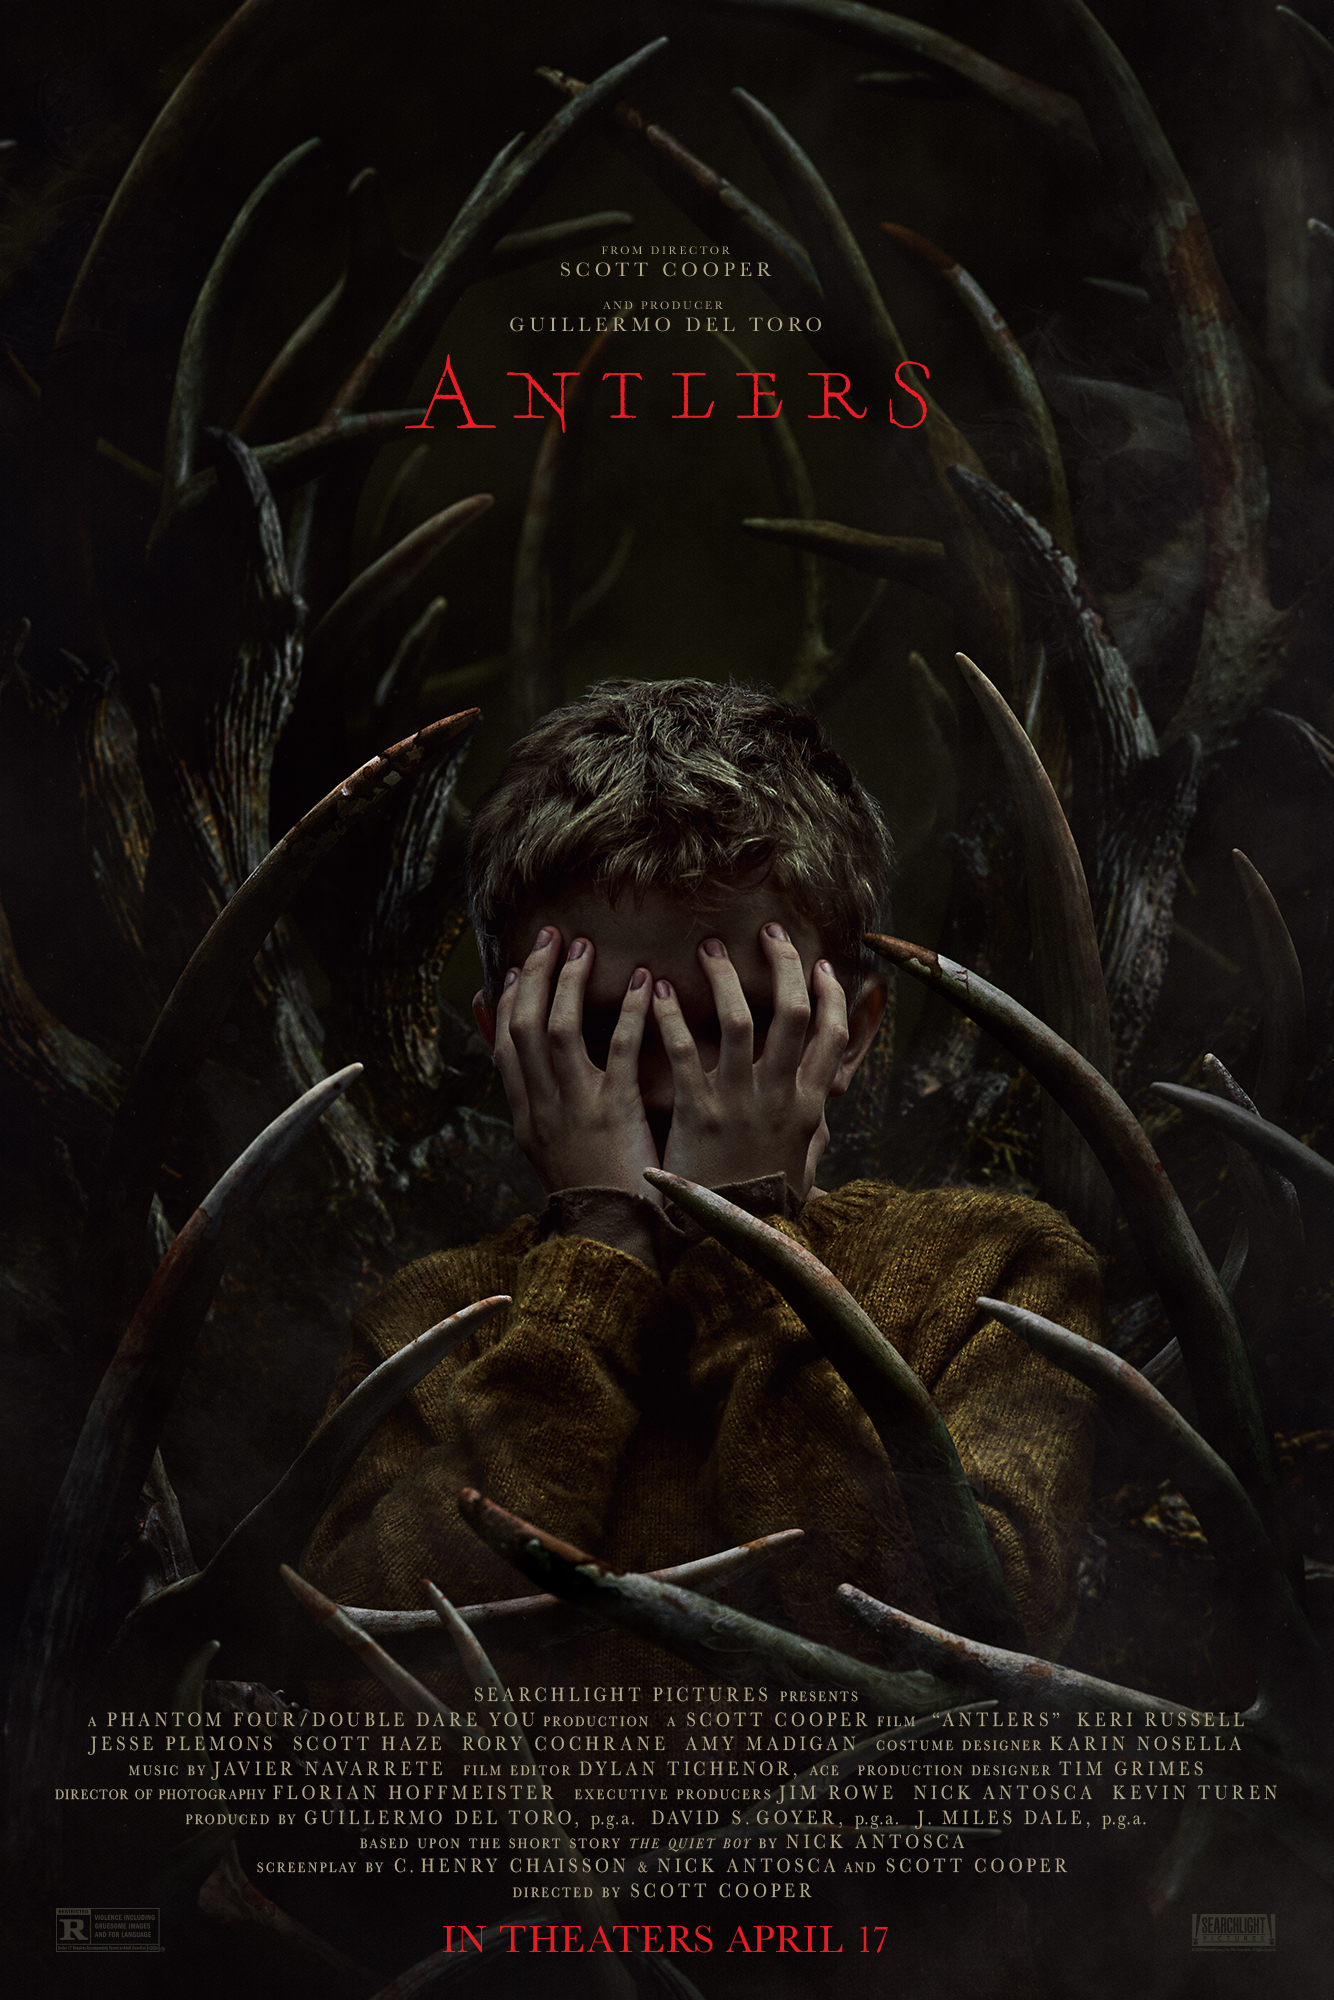 the antlers poster